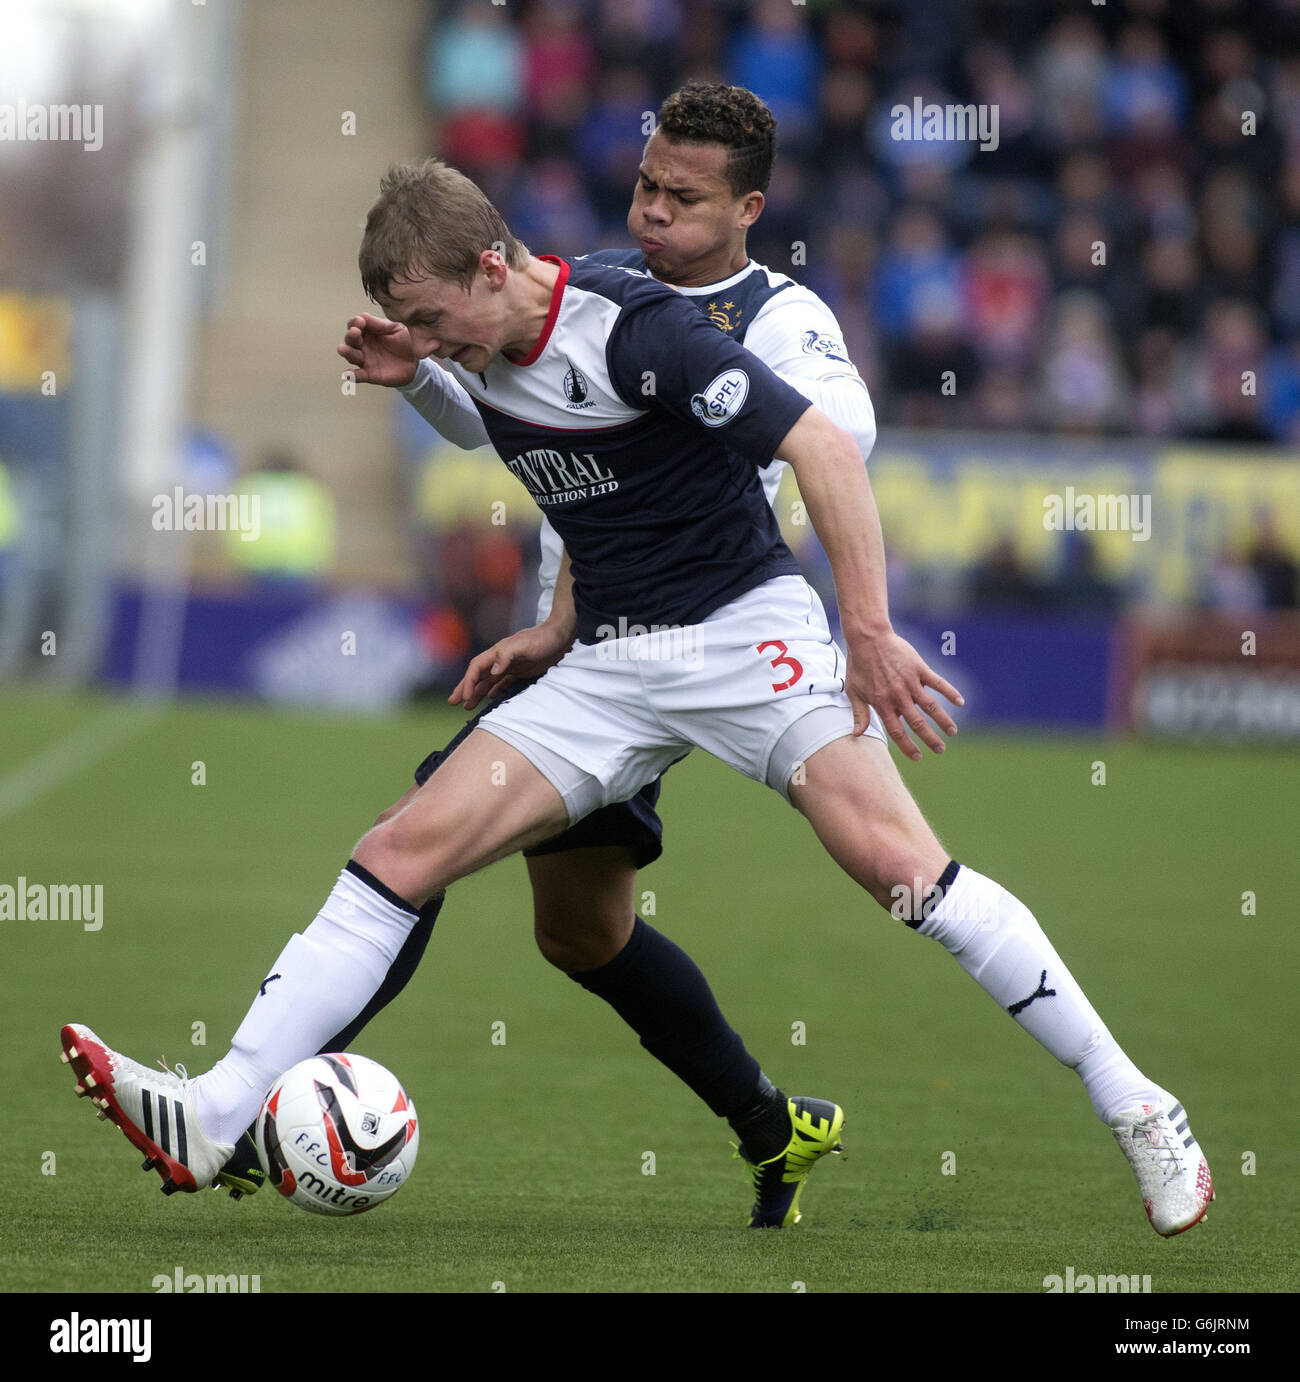 Rangers' Arnold Peralta and Falkirk's Stephen Kingslay (front) during the Fourth Round William Hill Scottish Cup match at Falkirk Stadium, Falkirk. Stock Photo